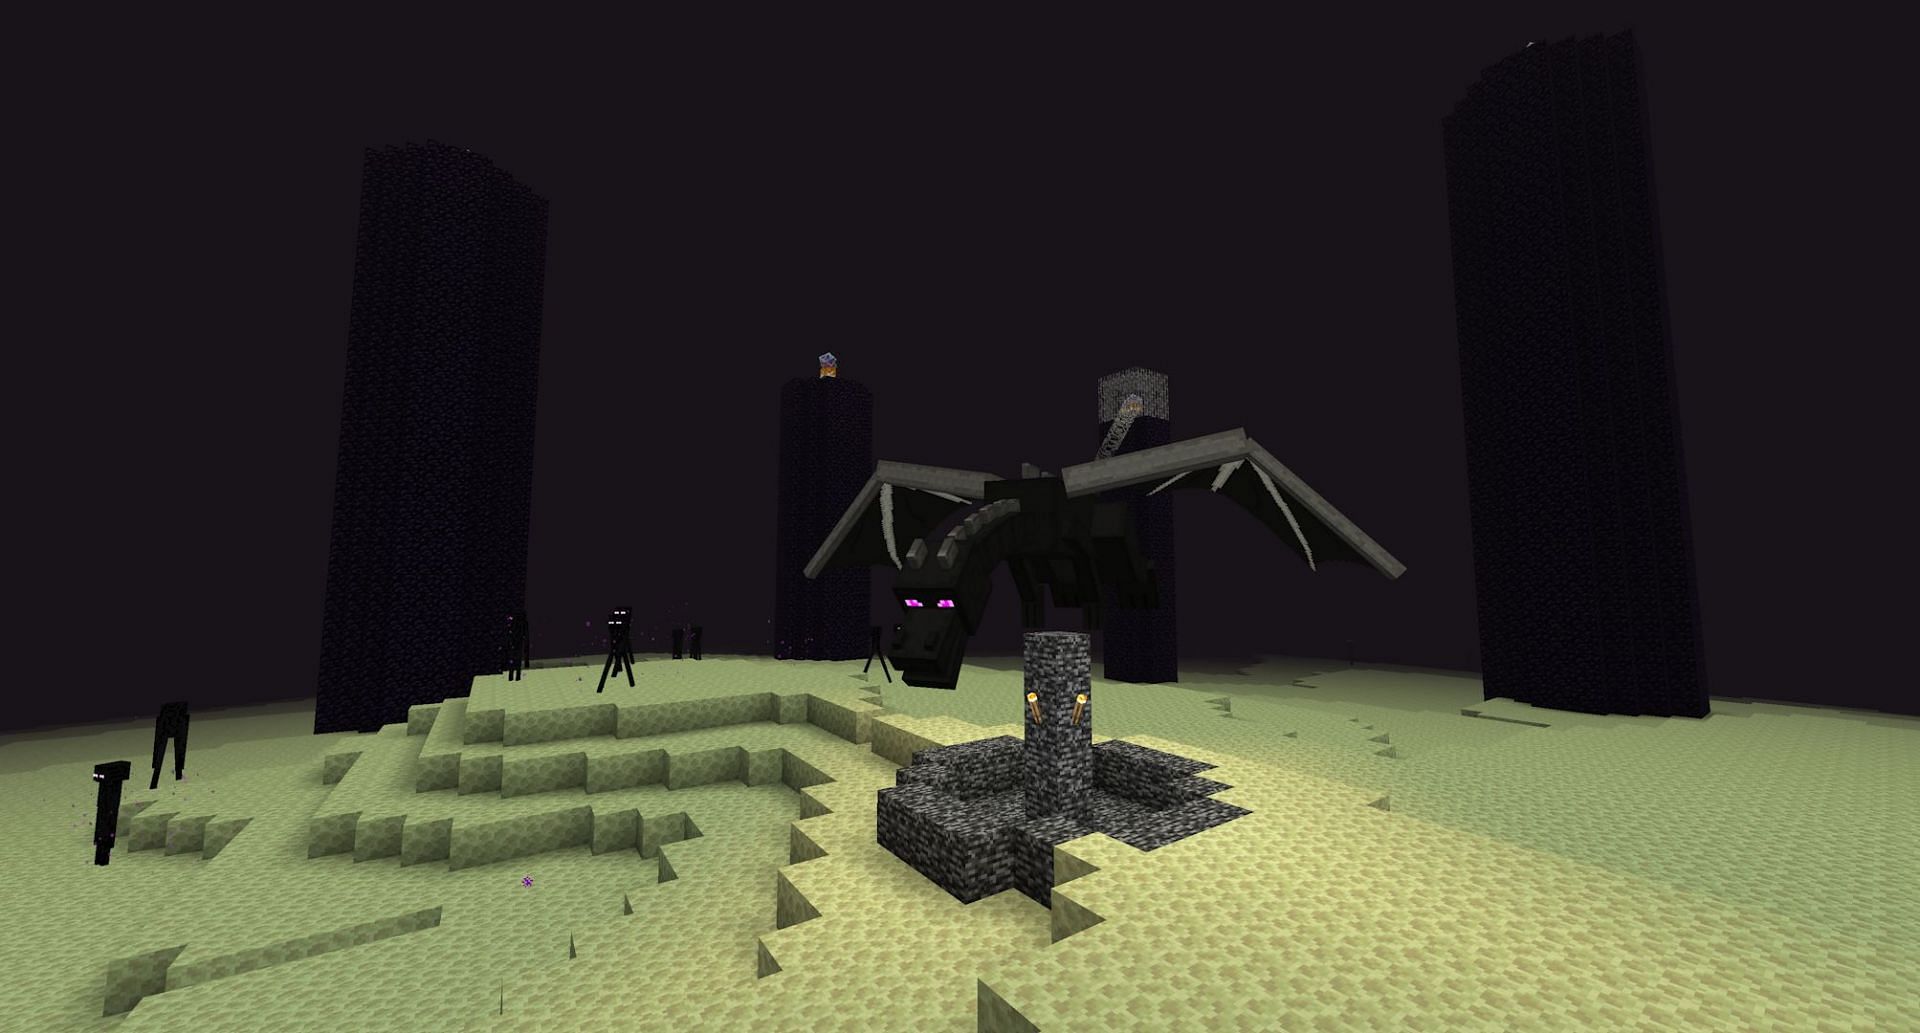 The ender dragon is one of the End